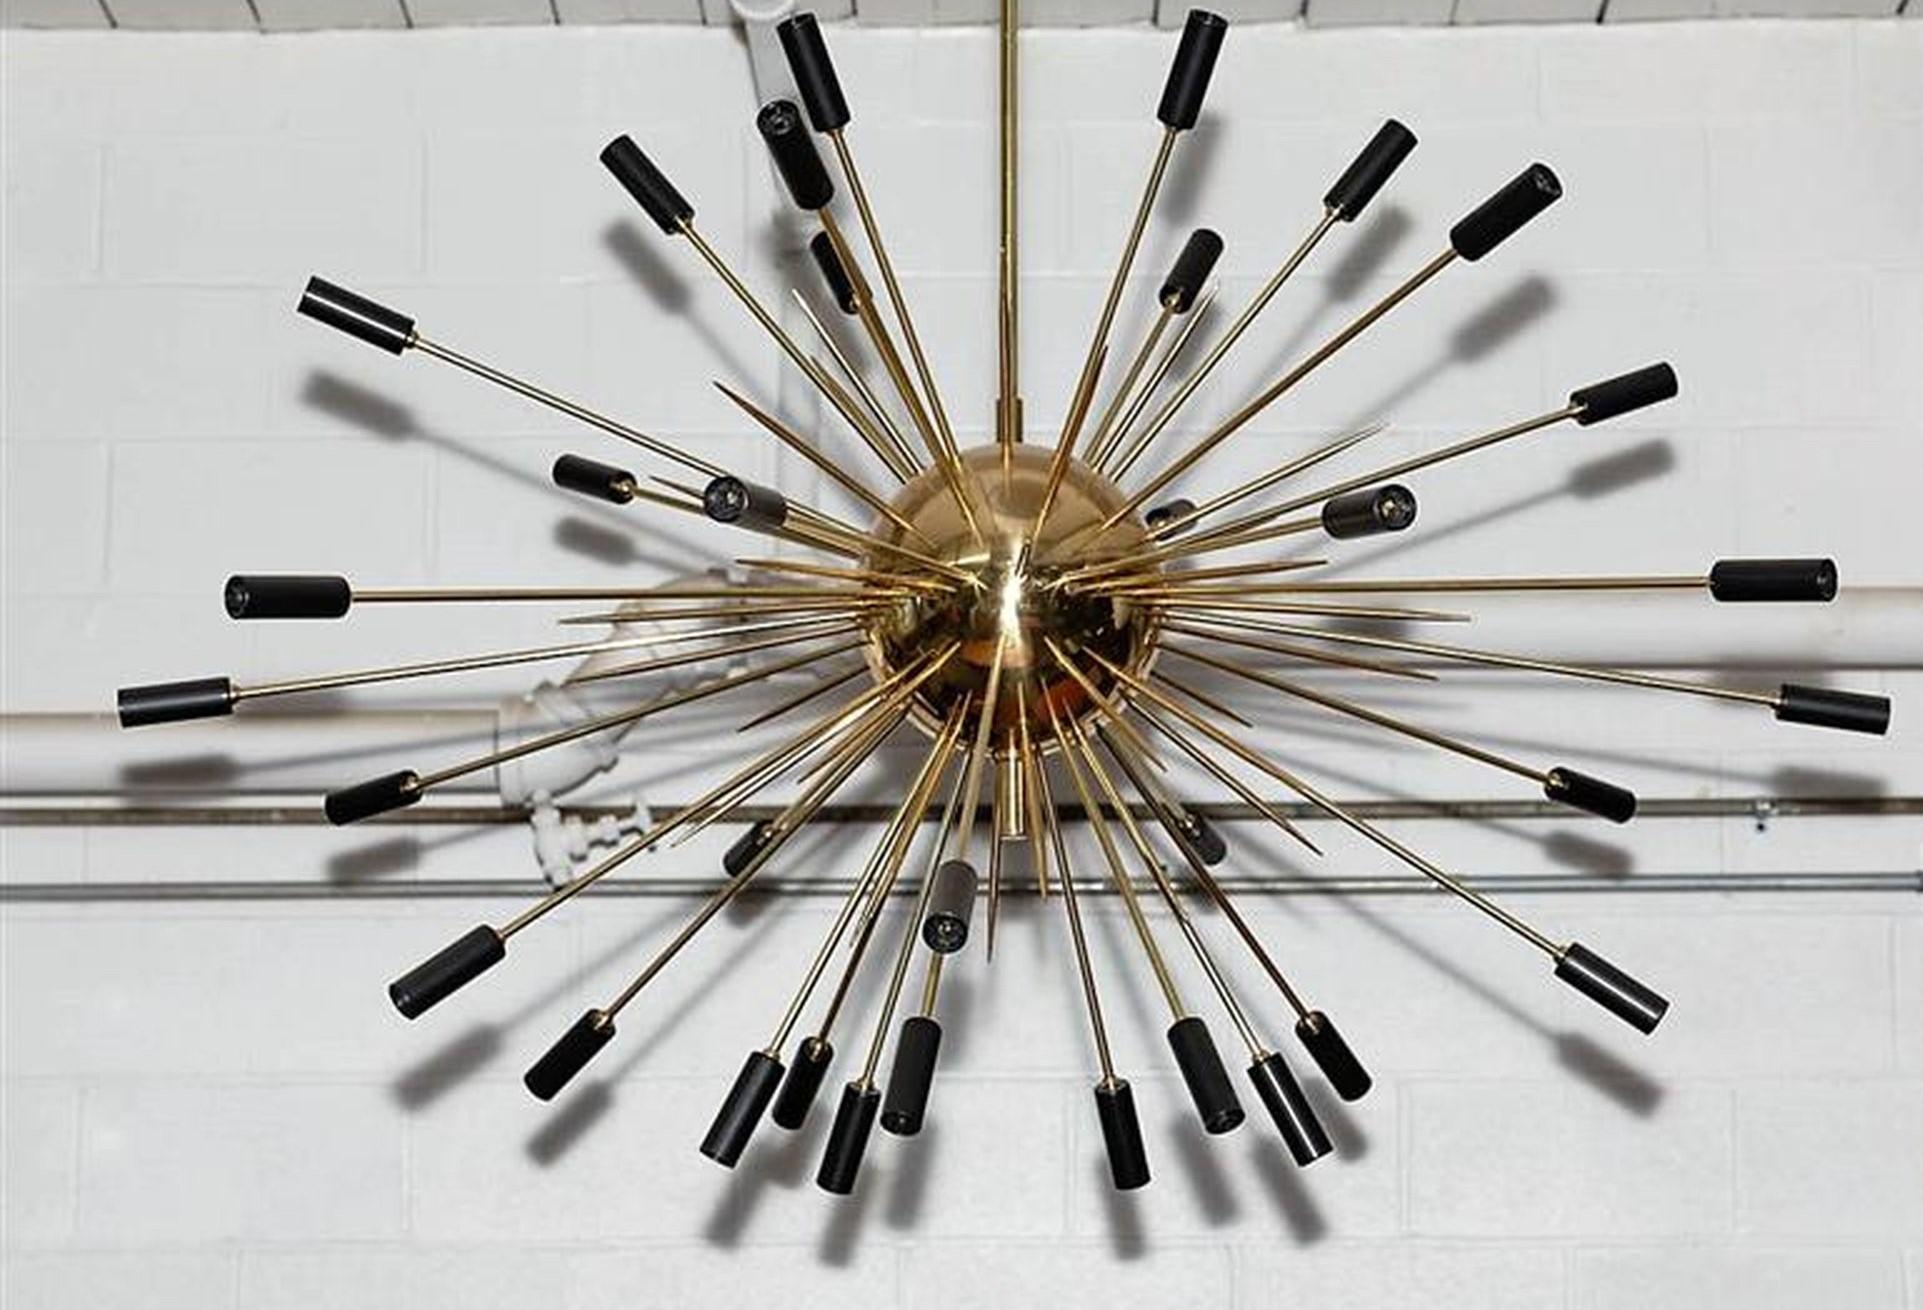 Large scale Italian light fixture reminiscent of an exploding star with black tips. Brass rods--both lit (34 candelabra bulbs) and speared--shoot out of a brass core. High-quality, hand made piece by Fedele Papagni Milano.
Wired for the US